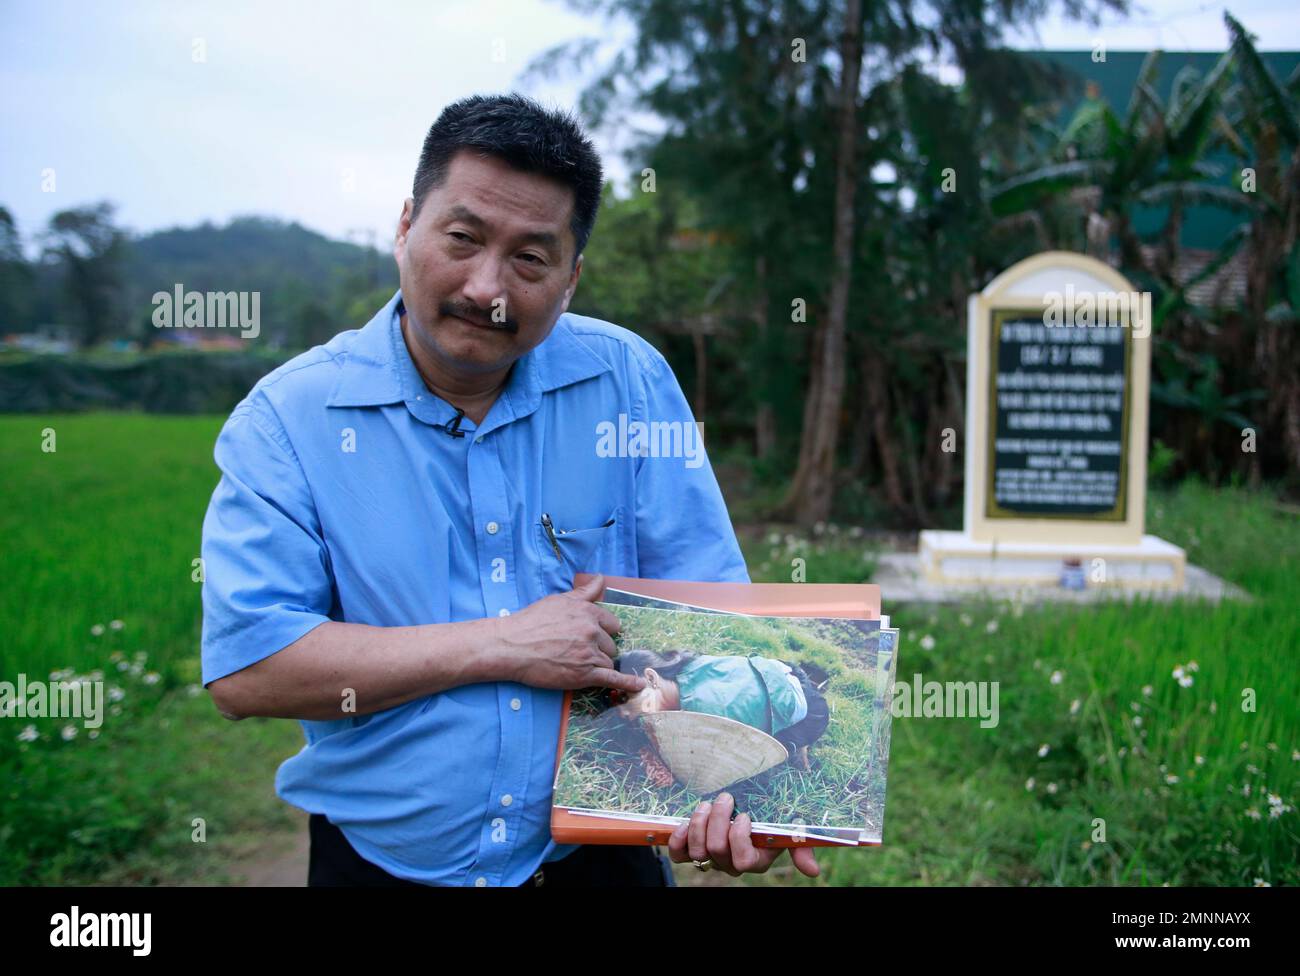 In this Mar. 15, 2018, photo, My Lai massacre survivor Tran Van Duc points at a photo taken by U.S. army photographer Ron Haeberle of his mother Nguyen Thi Tau, who was killed in the massacre in My Lai, Vietnam. More than a thousand people attend the commemoration marking the 50th anniversary of the My Lai massacre in which 504 unarmed civilians, most of the children, women and elderly men. (AP Photo/ Hau Dinh) Banque D'Images